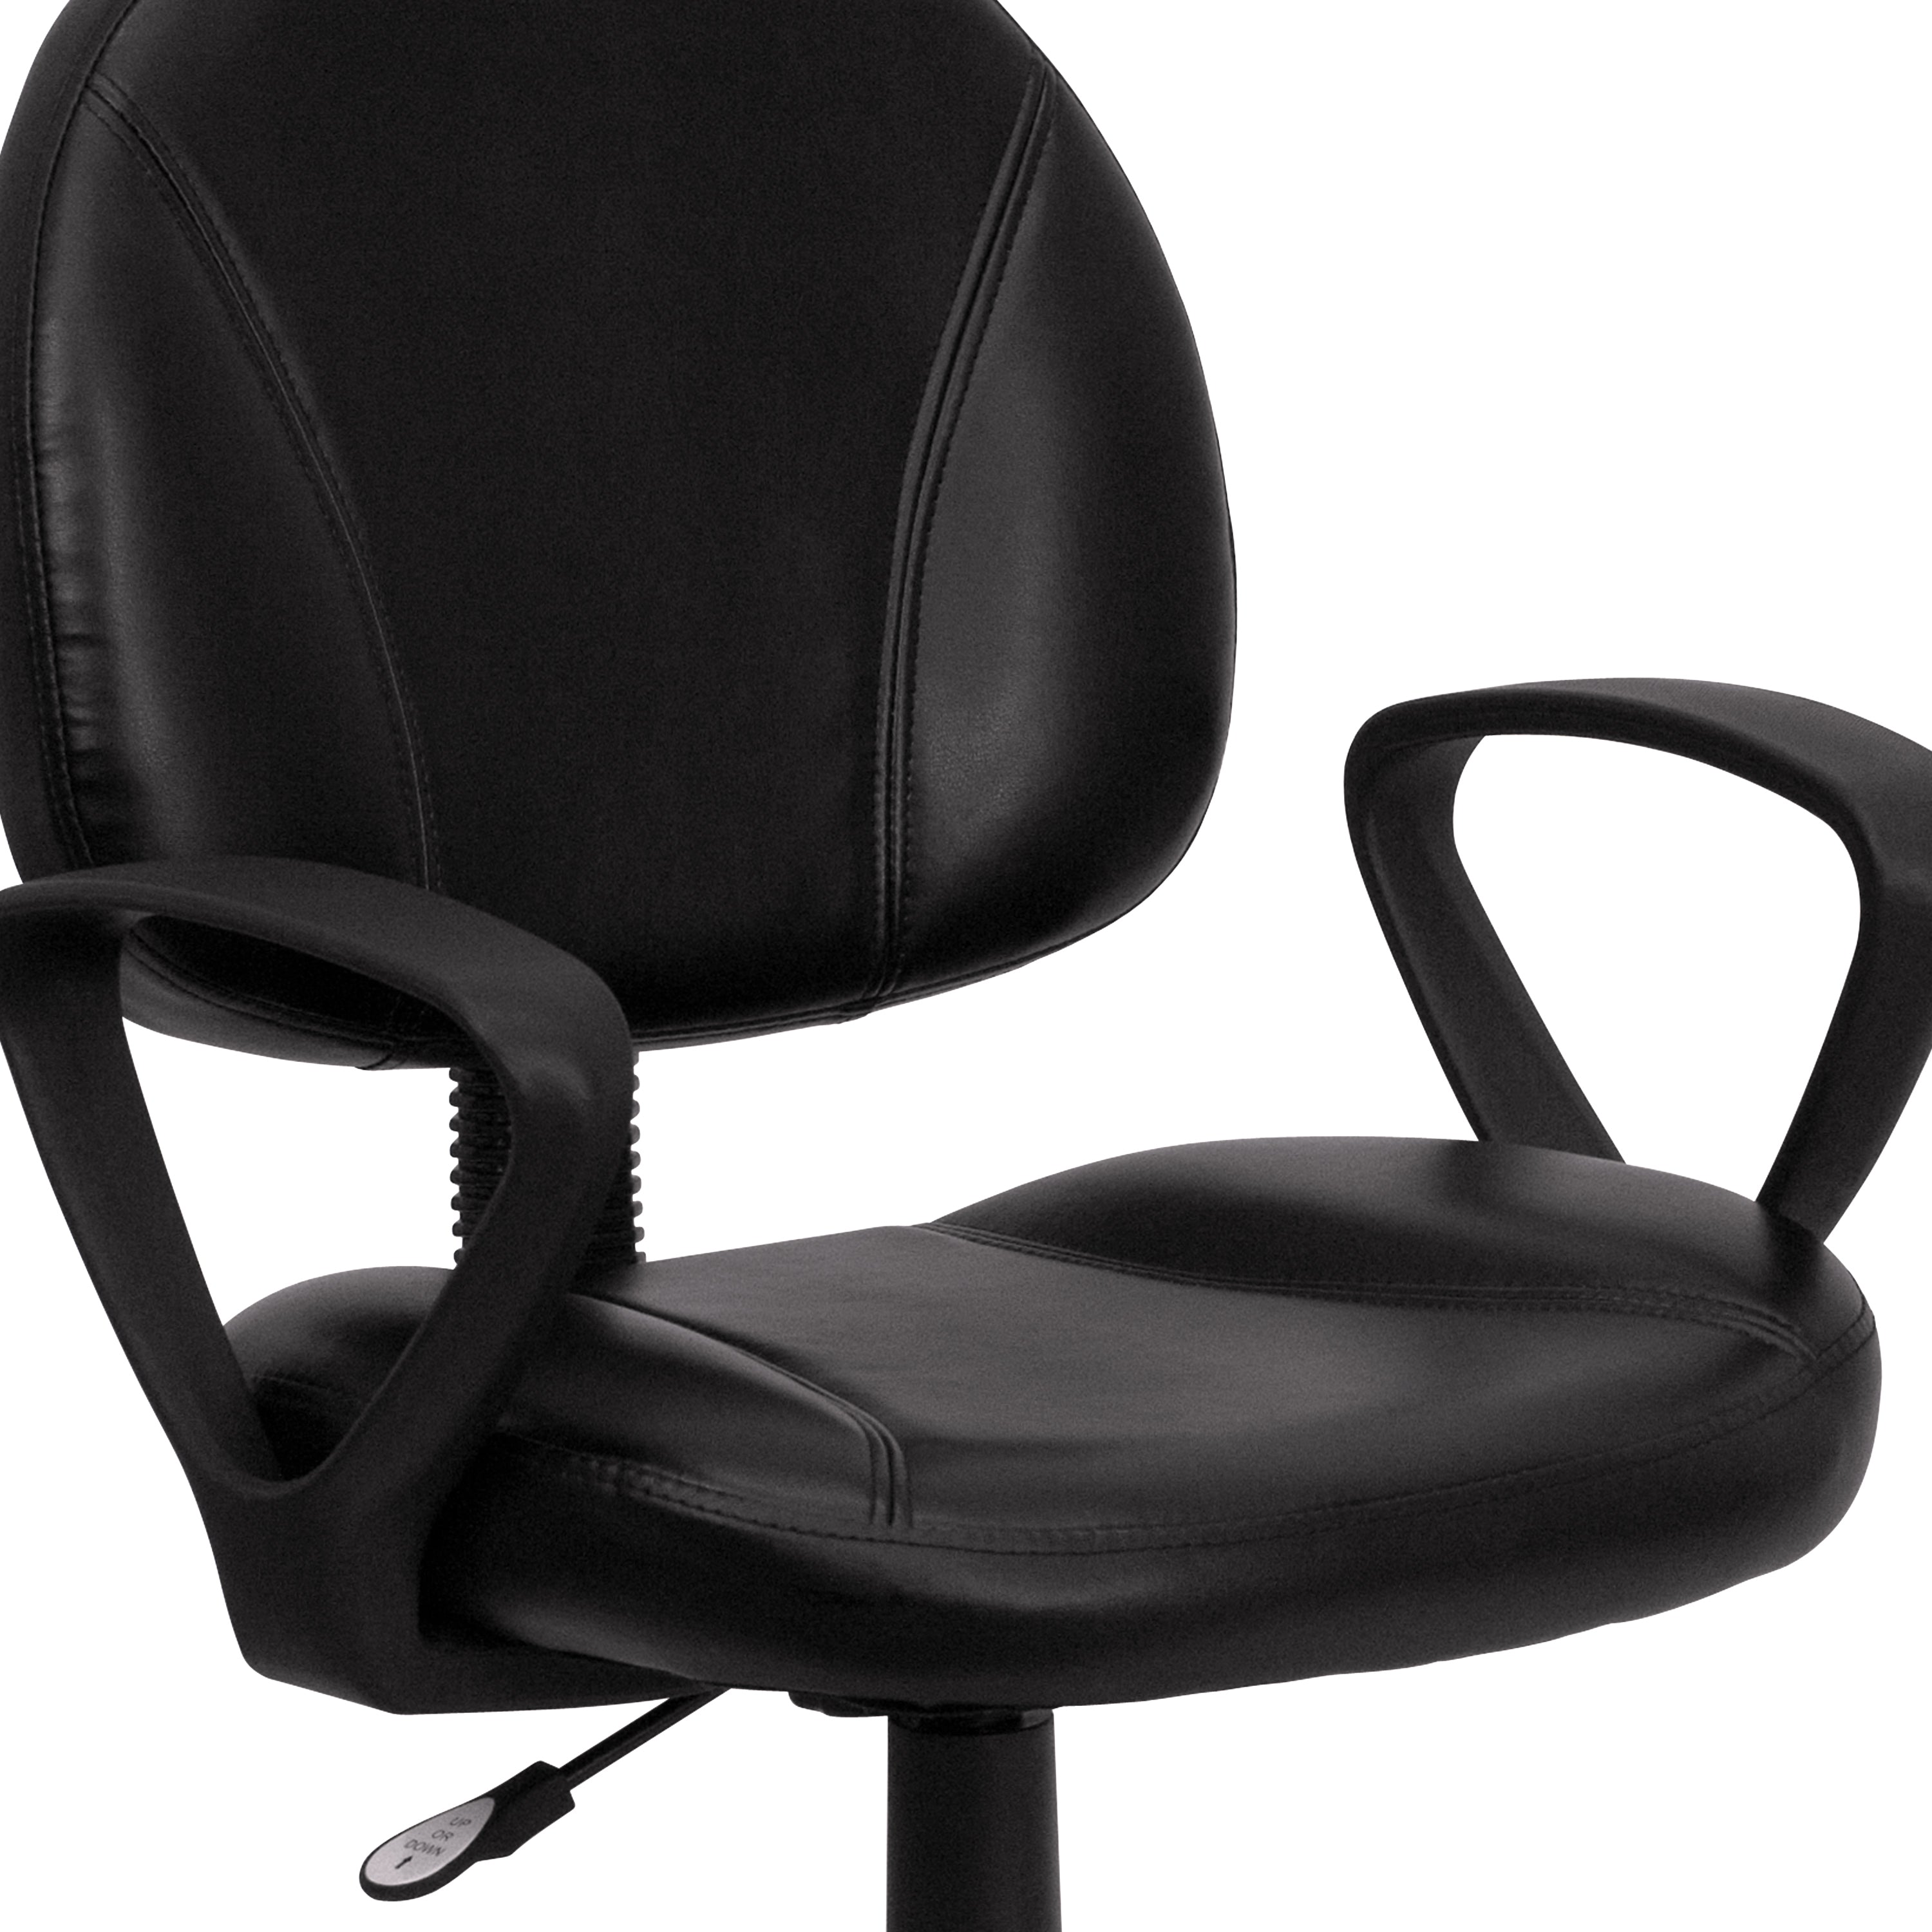 Mid-Back LeatherSoft Swivel Ergonomic Task Office Chair with Back Depth Adjustment and Arms-Office Chair-Flash Furniture-Wall2Wall Furnishings